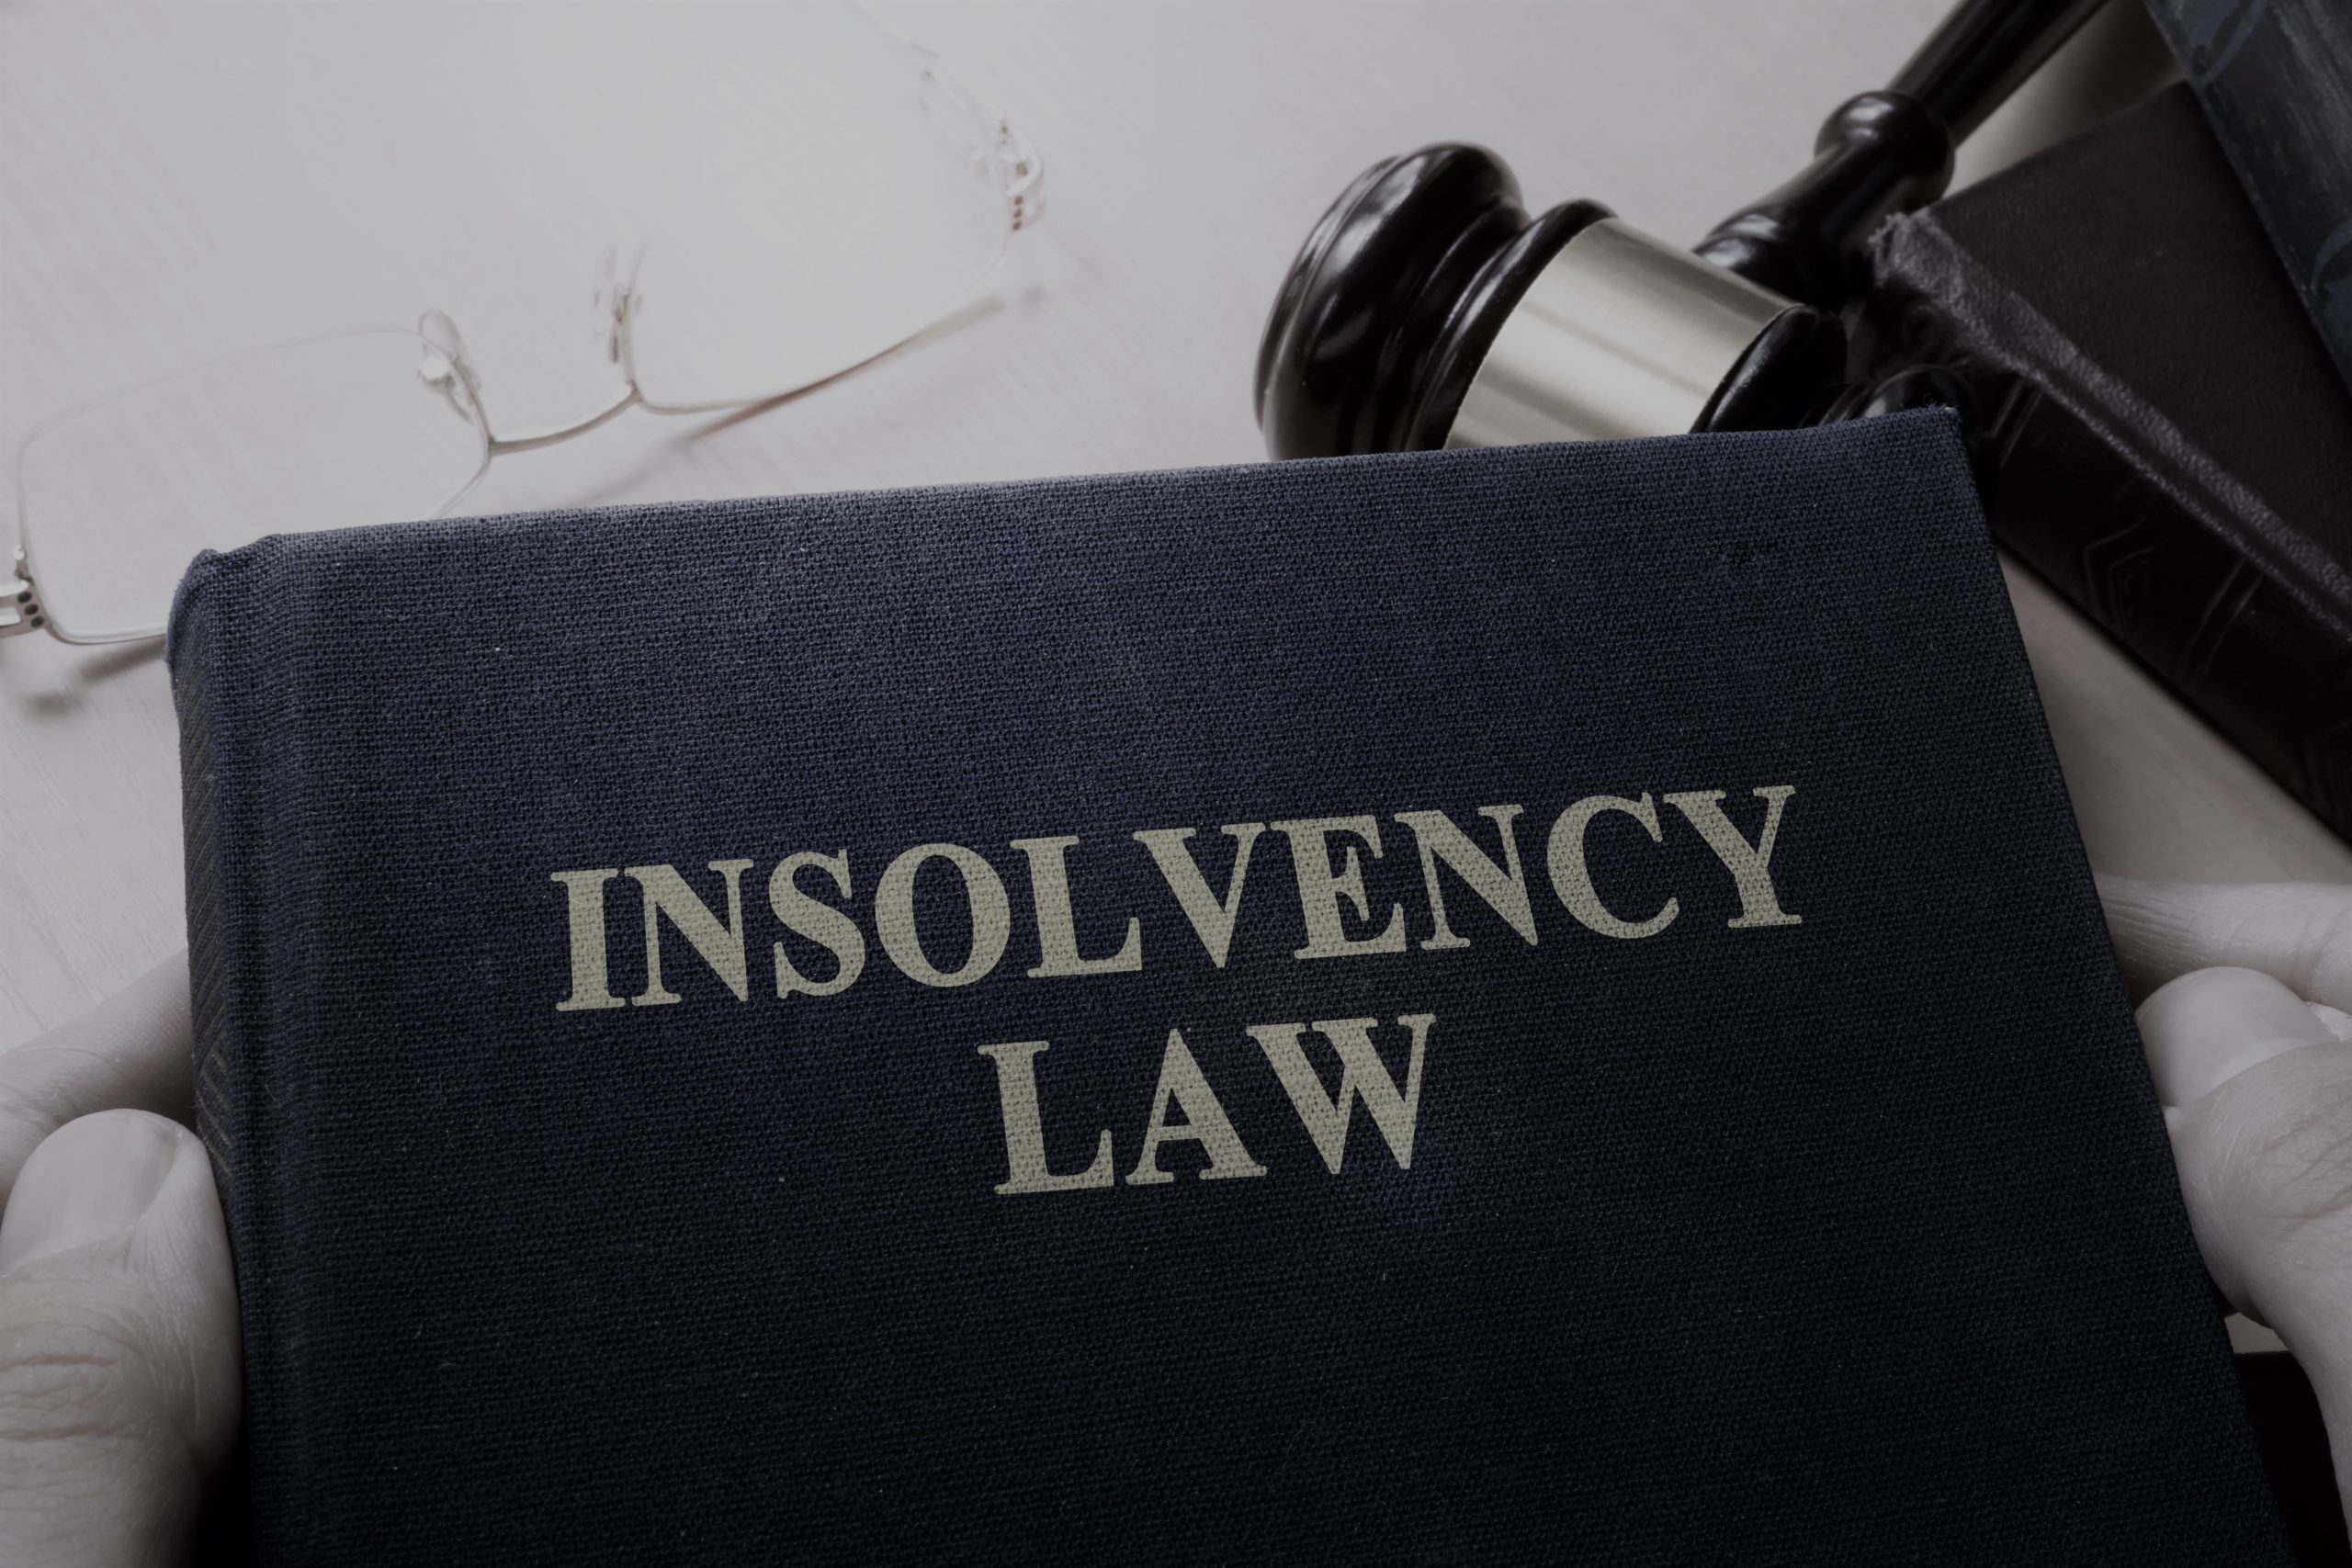 How to become an insolvency expert